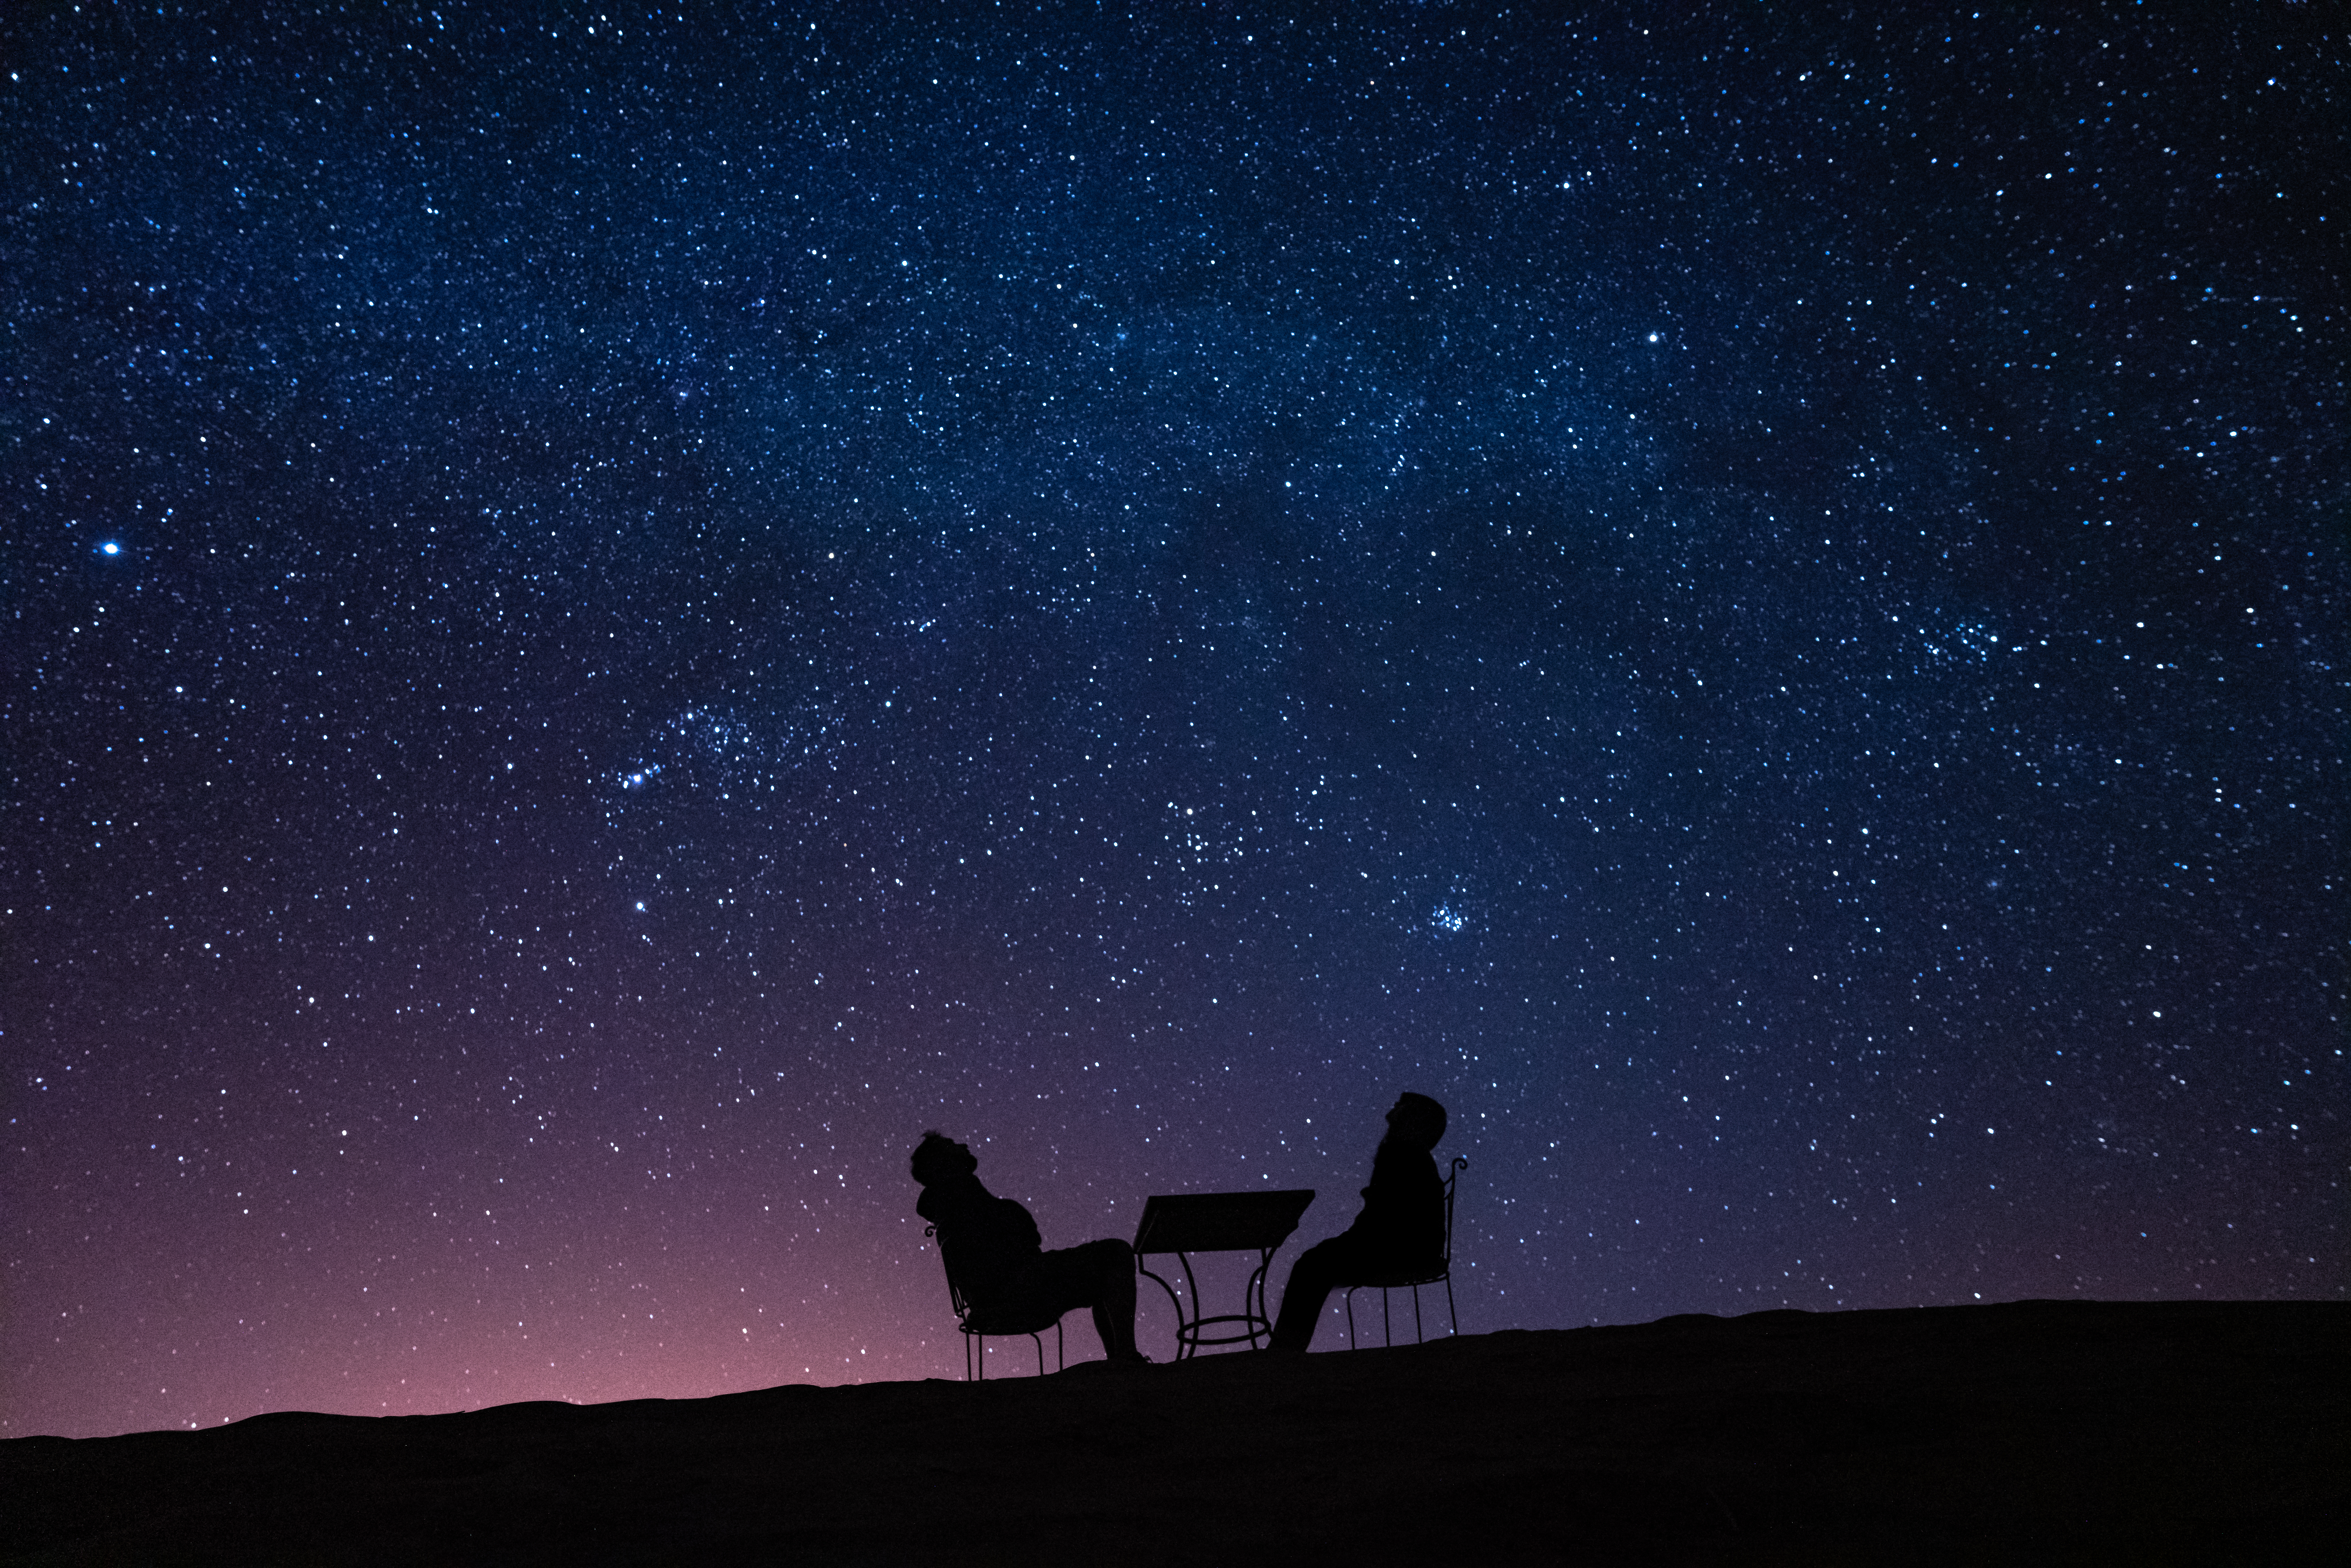 Visitors experiencing the breath-taking night sky over the desert. – © Ylenia Cancelli / Shutterstock